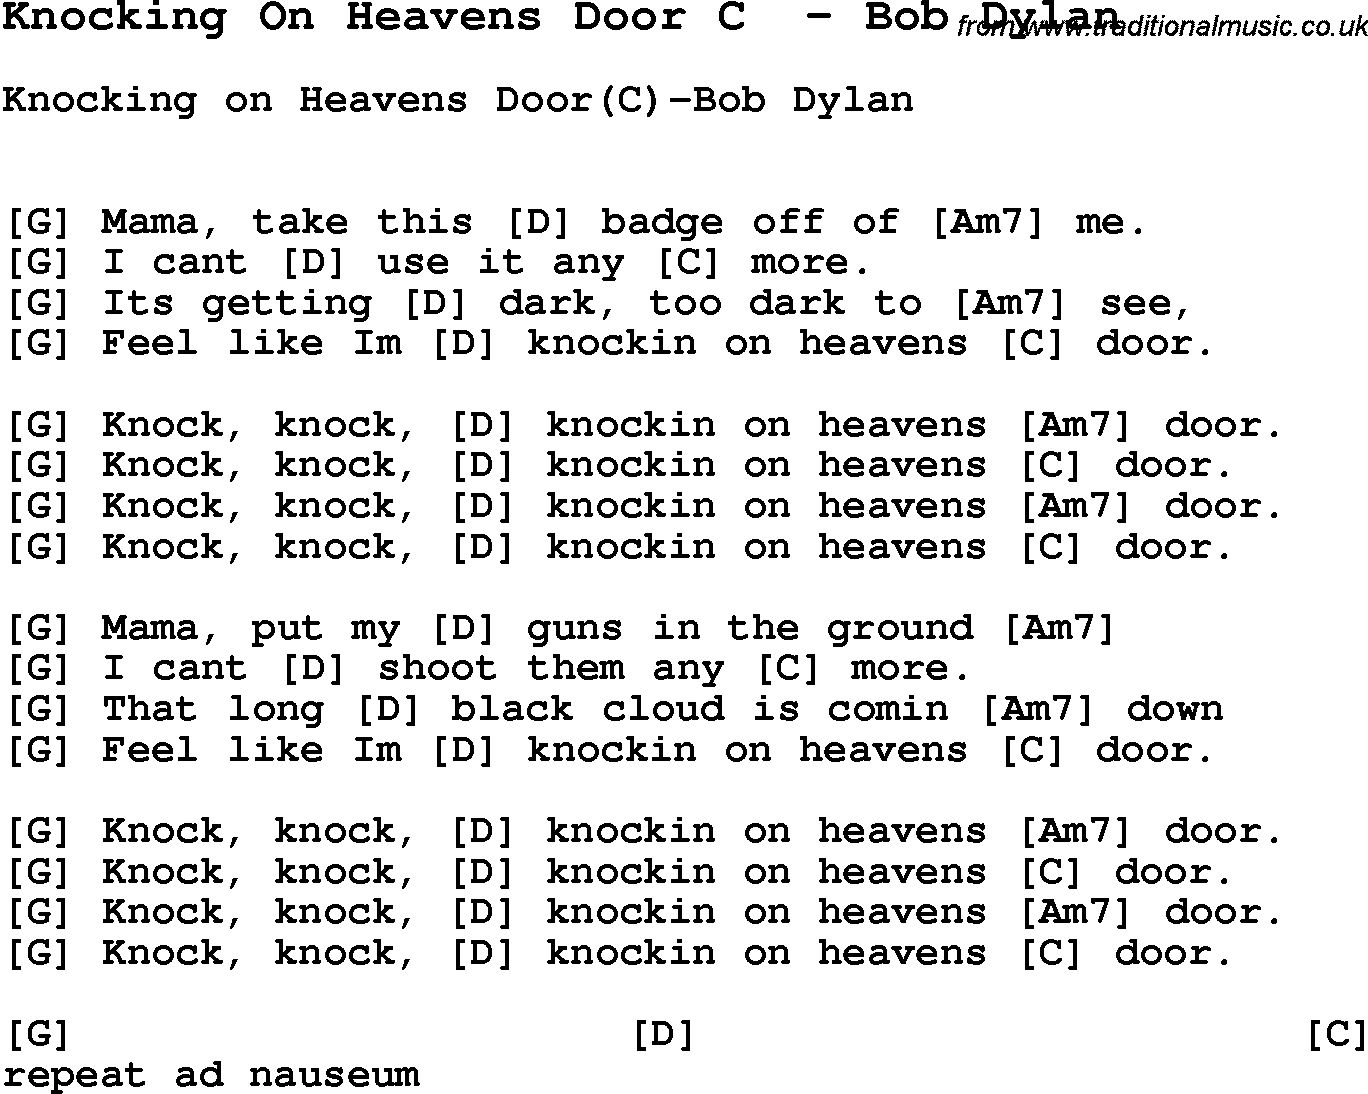 Song Knocking On Heavens Door C  by Bob Dylan, with lyrics for vocal performance and accompaniment chords for Ukulele, Guitar Banjo etc.